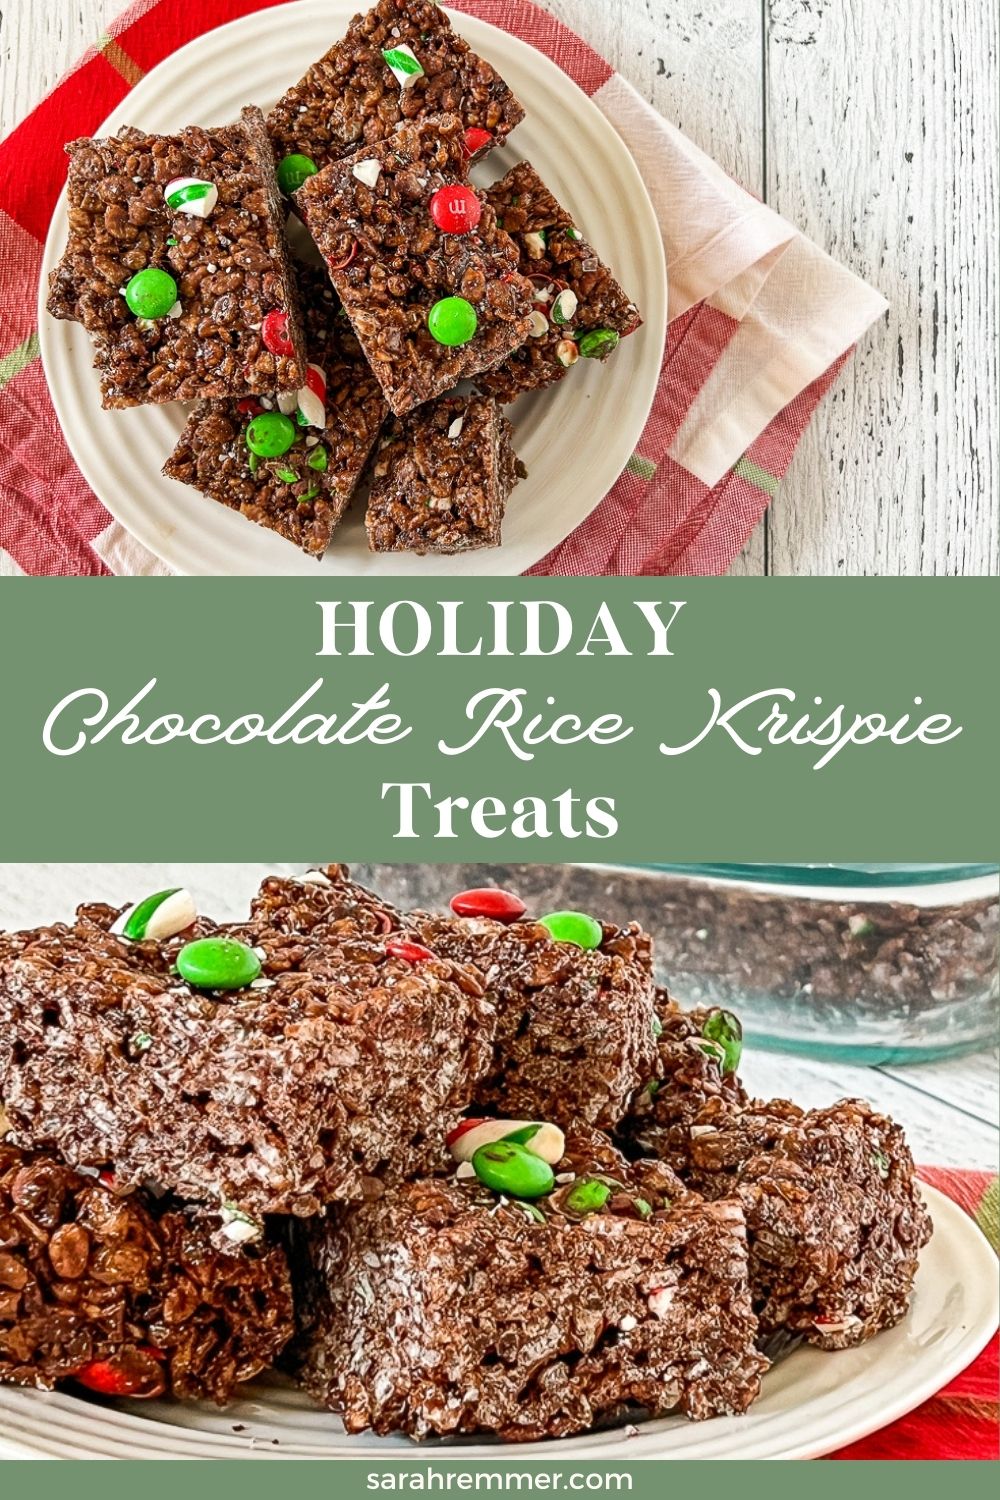 If you’re looking for a fun, delicious and EASY Christmas treat to make with your kiddos, this holiday Chocolate Rice Krispie Treats recipe is the one! 